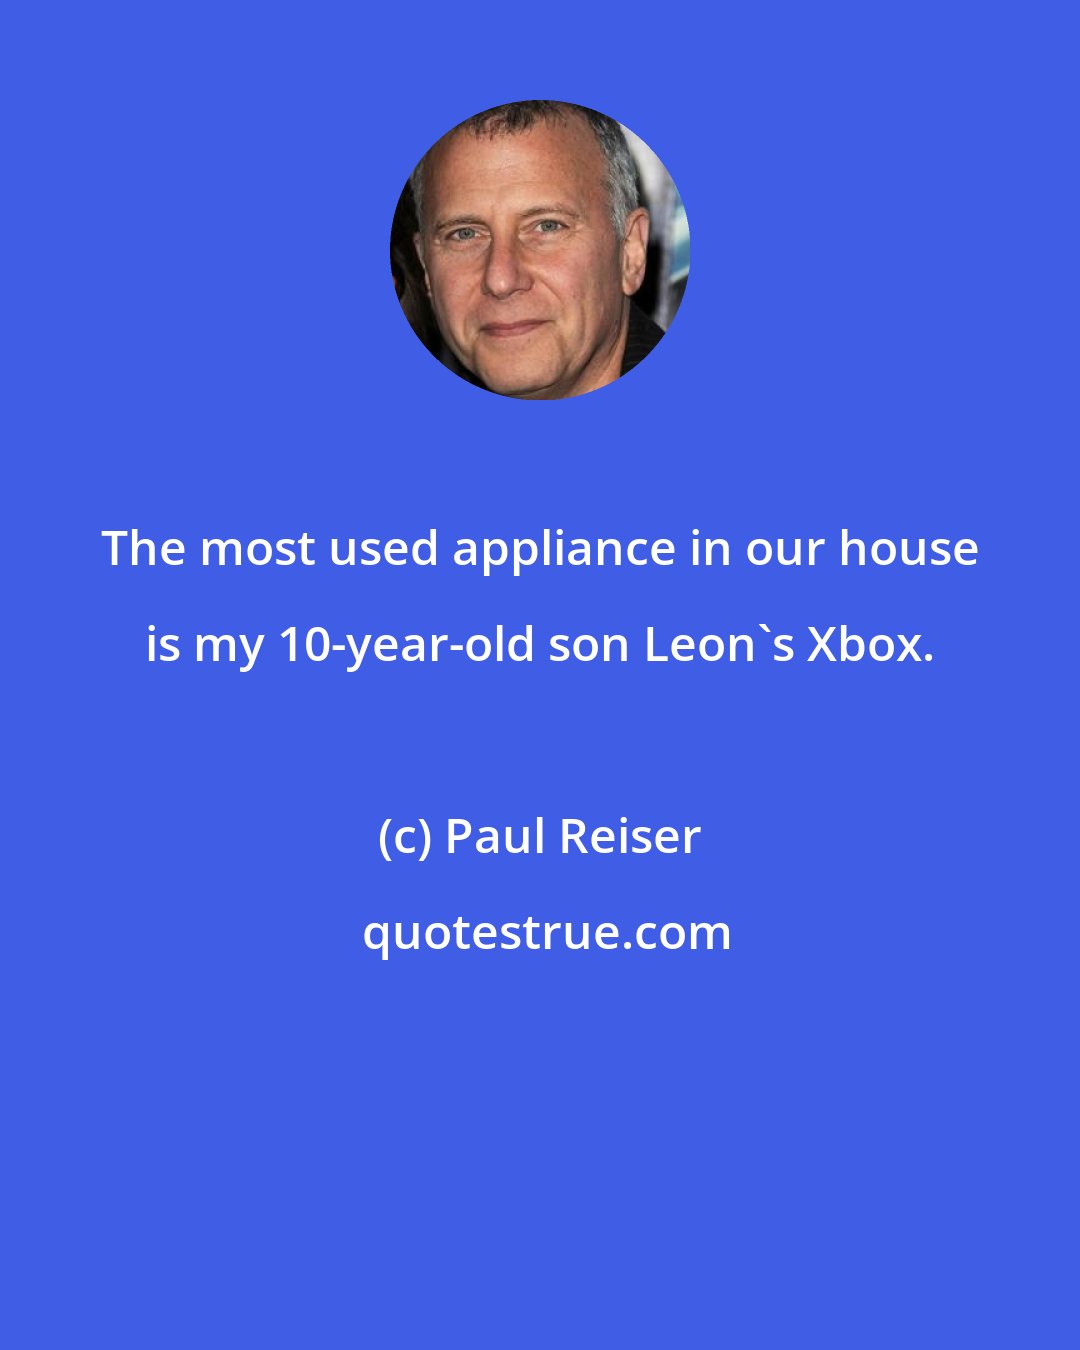 Paul Reiser: The most used appliance in our house is my 10-year-old son Leon's Xbox.